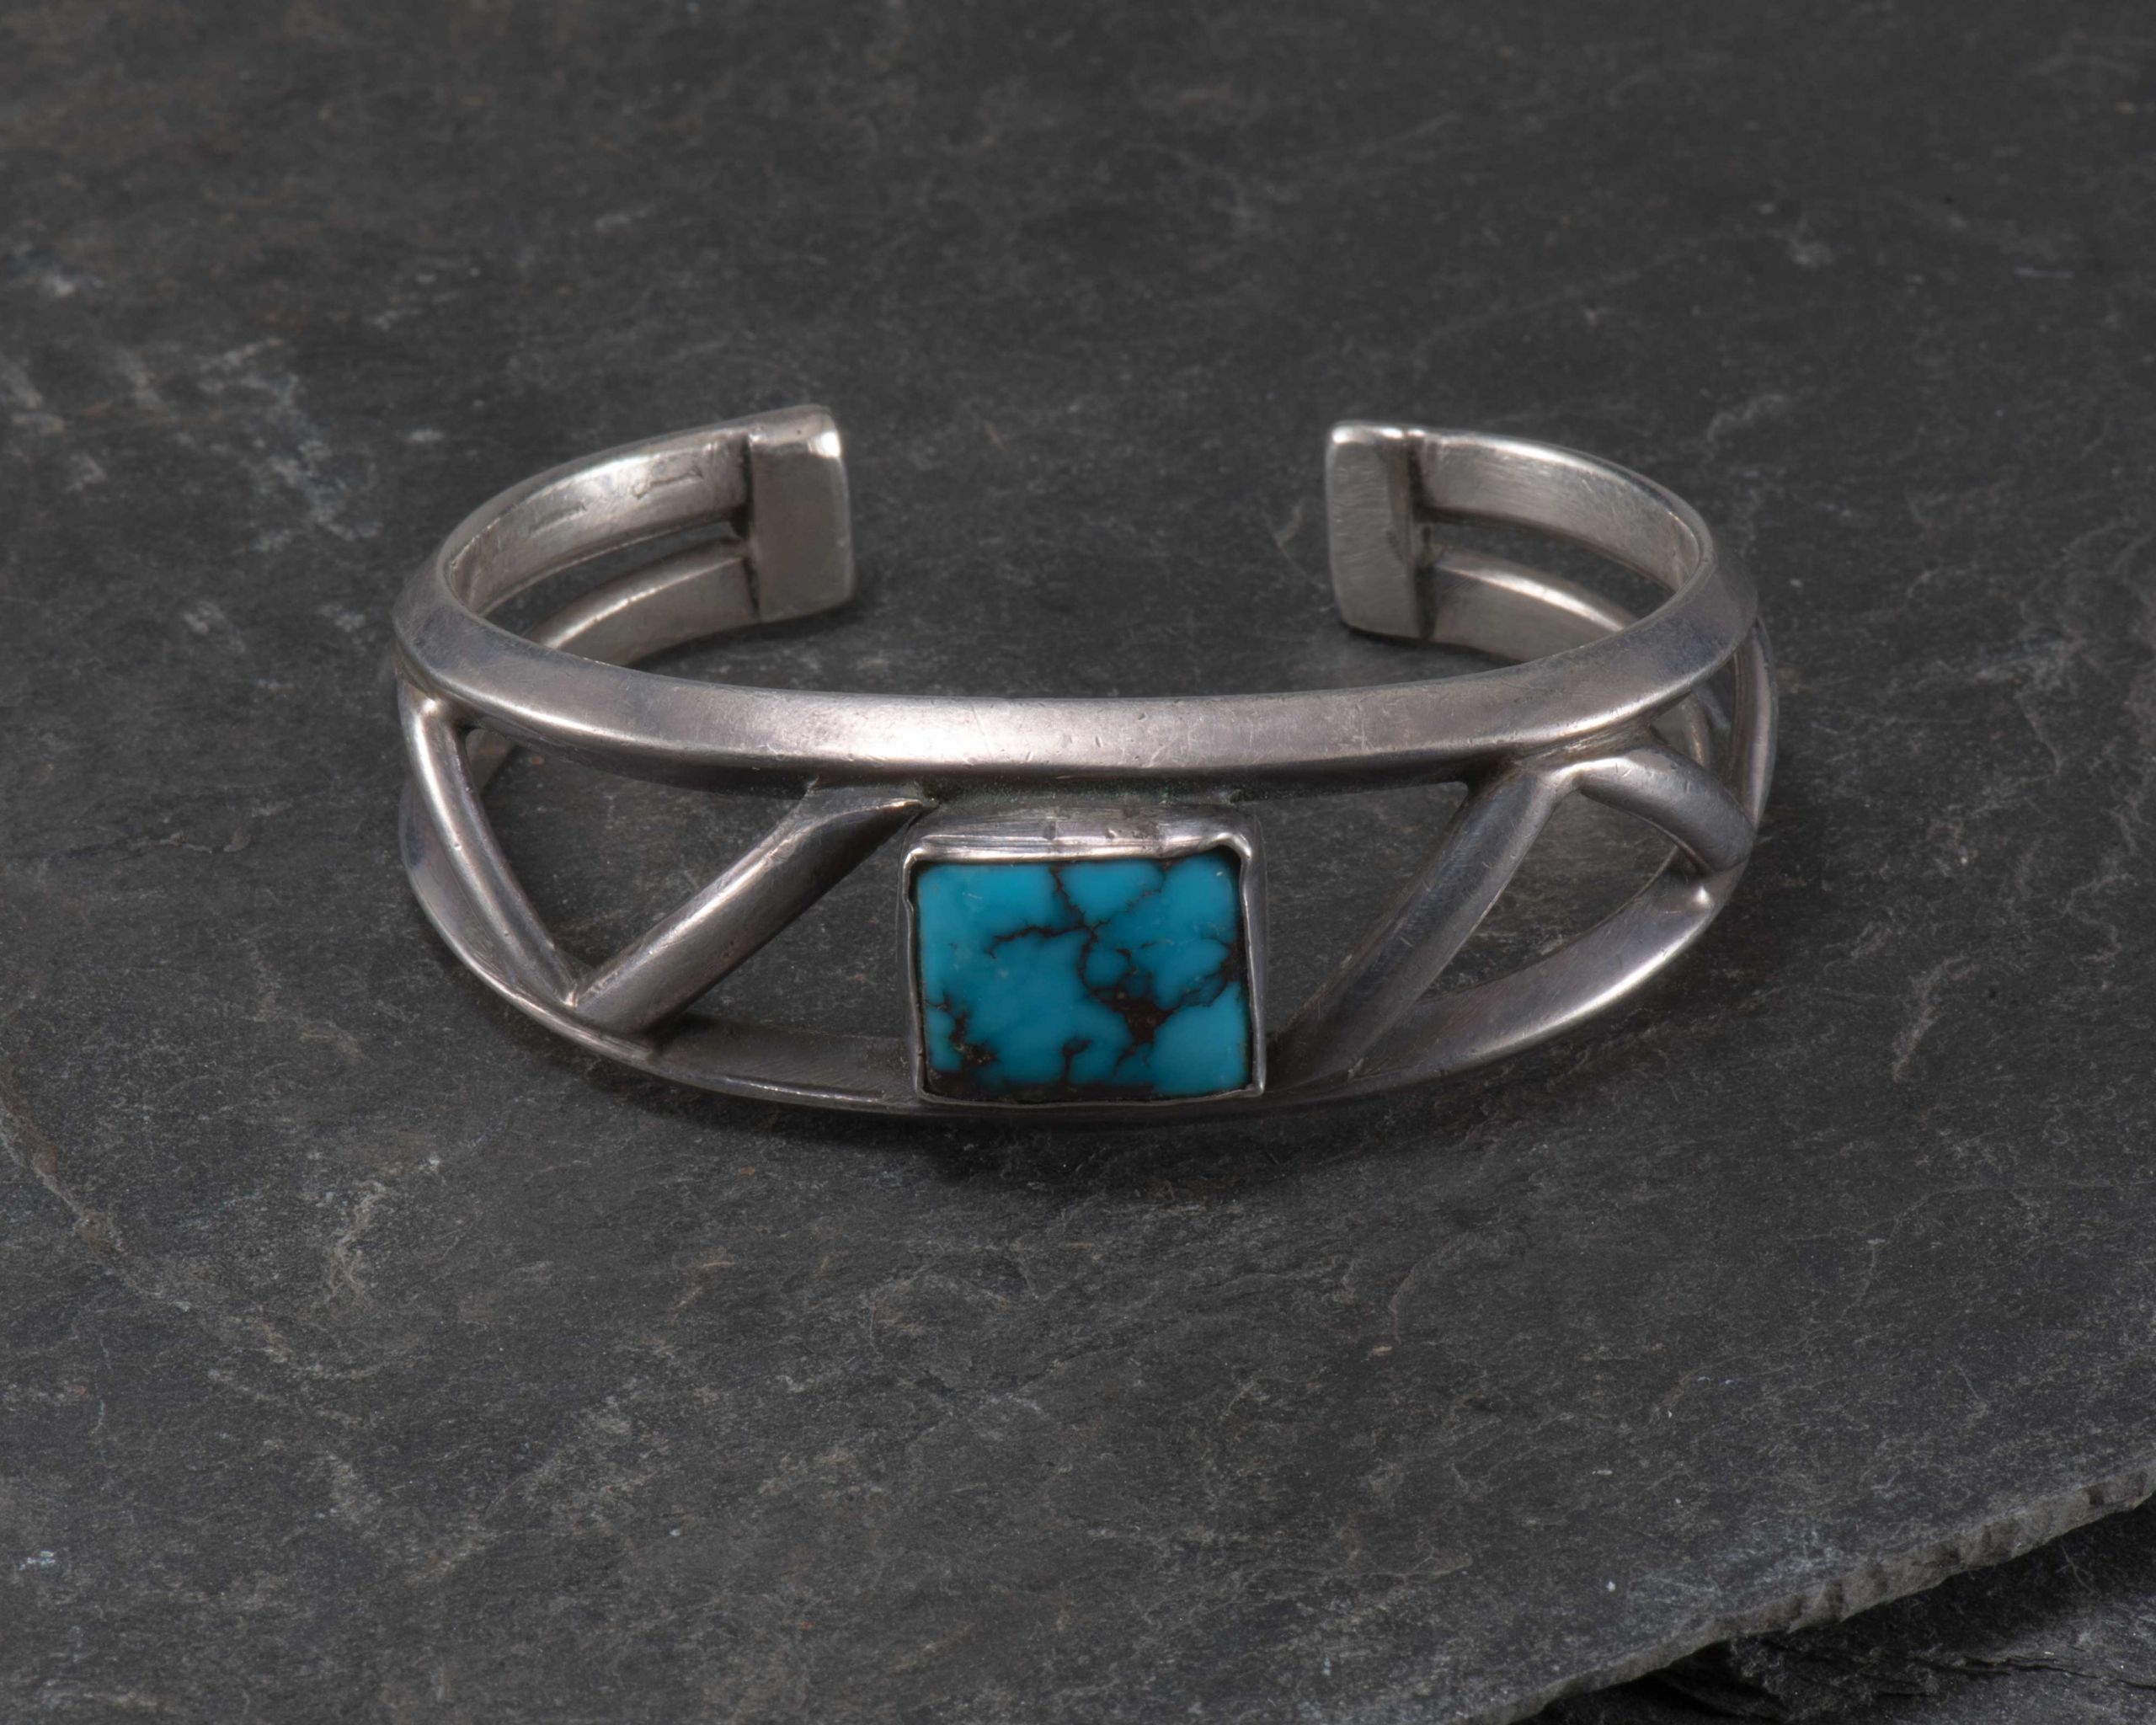 Vintage Turquoise Cuff with Open Shank